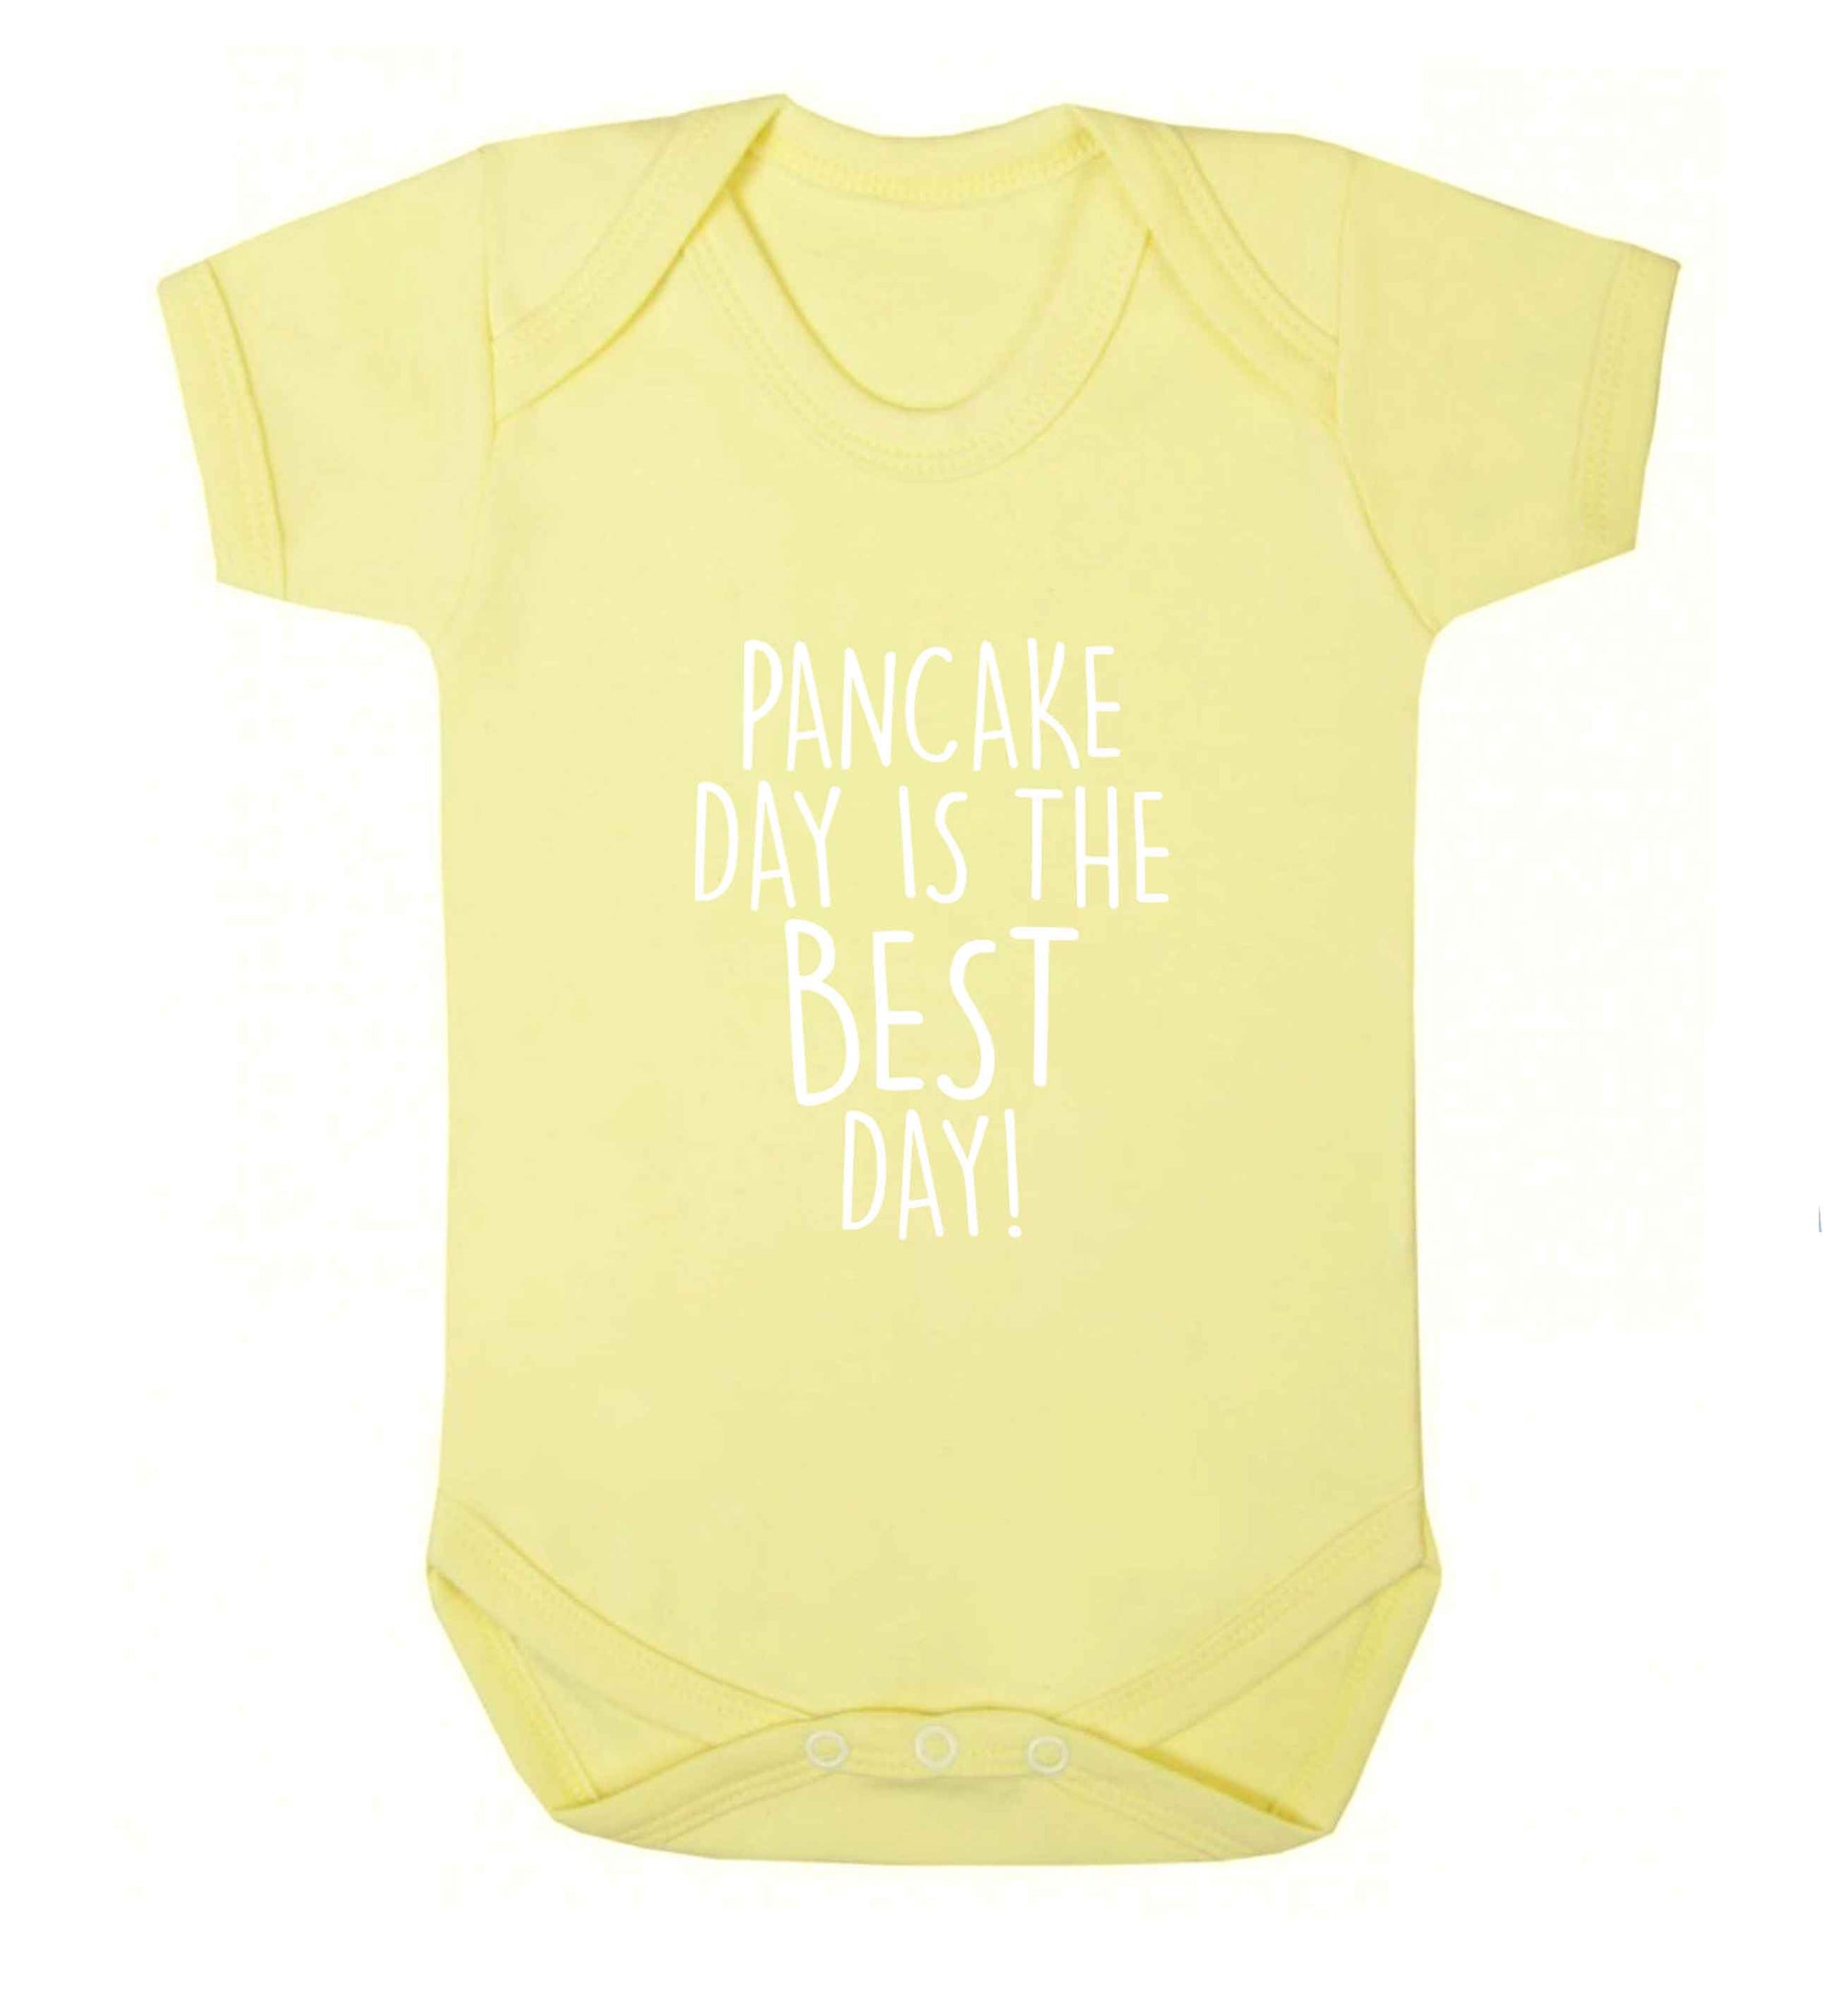 Pancake day is the best day baby vest pale yellow 18-24 months